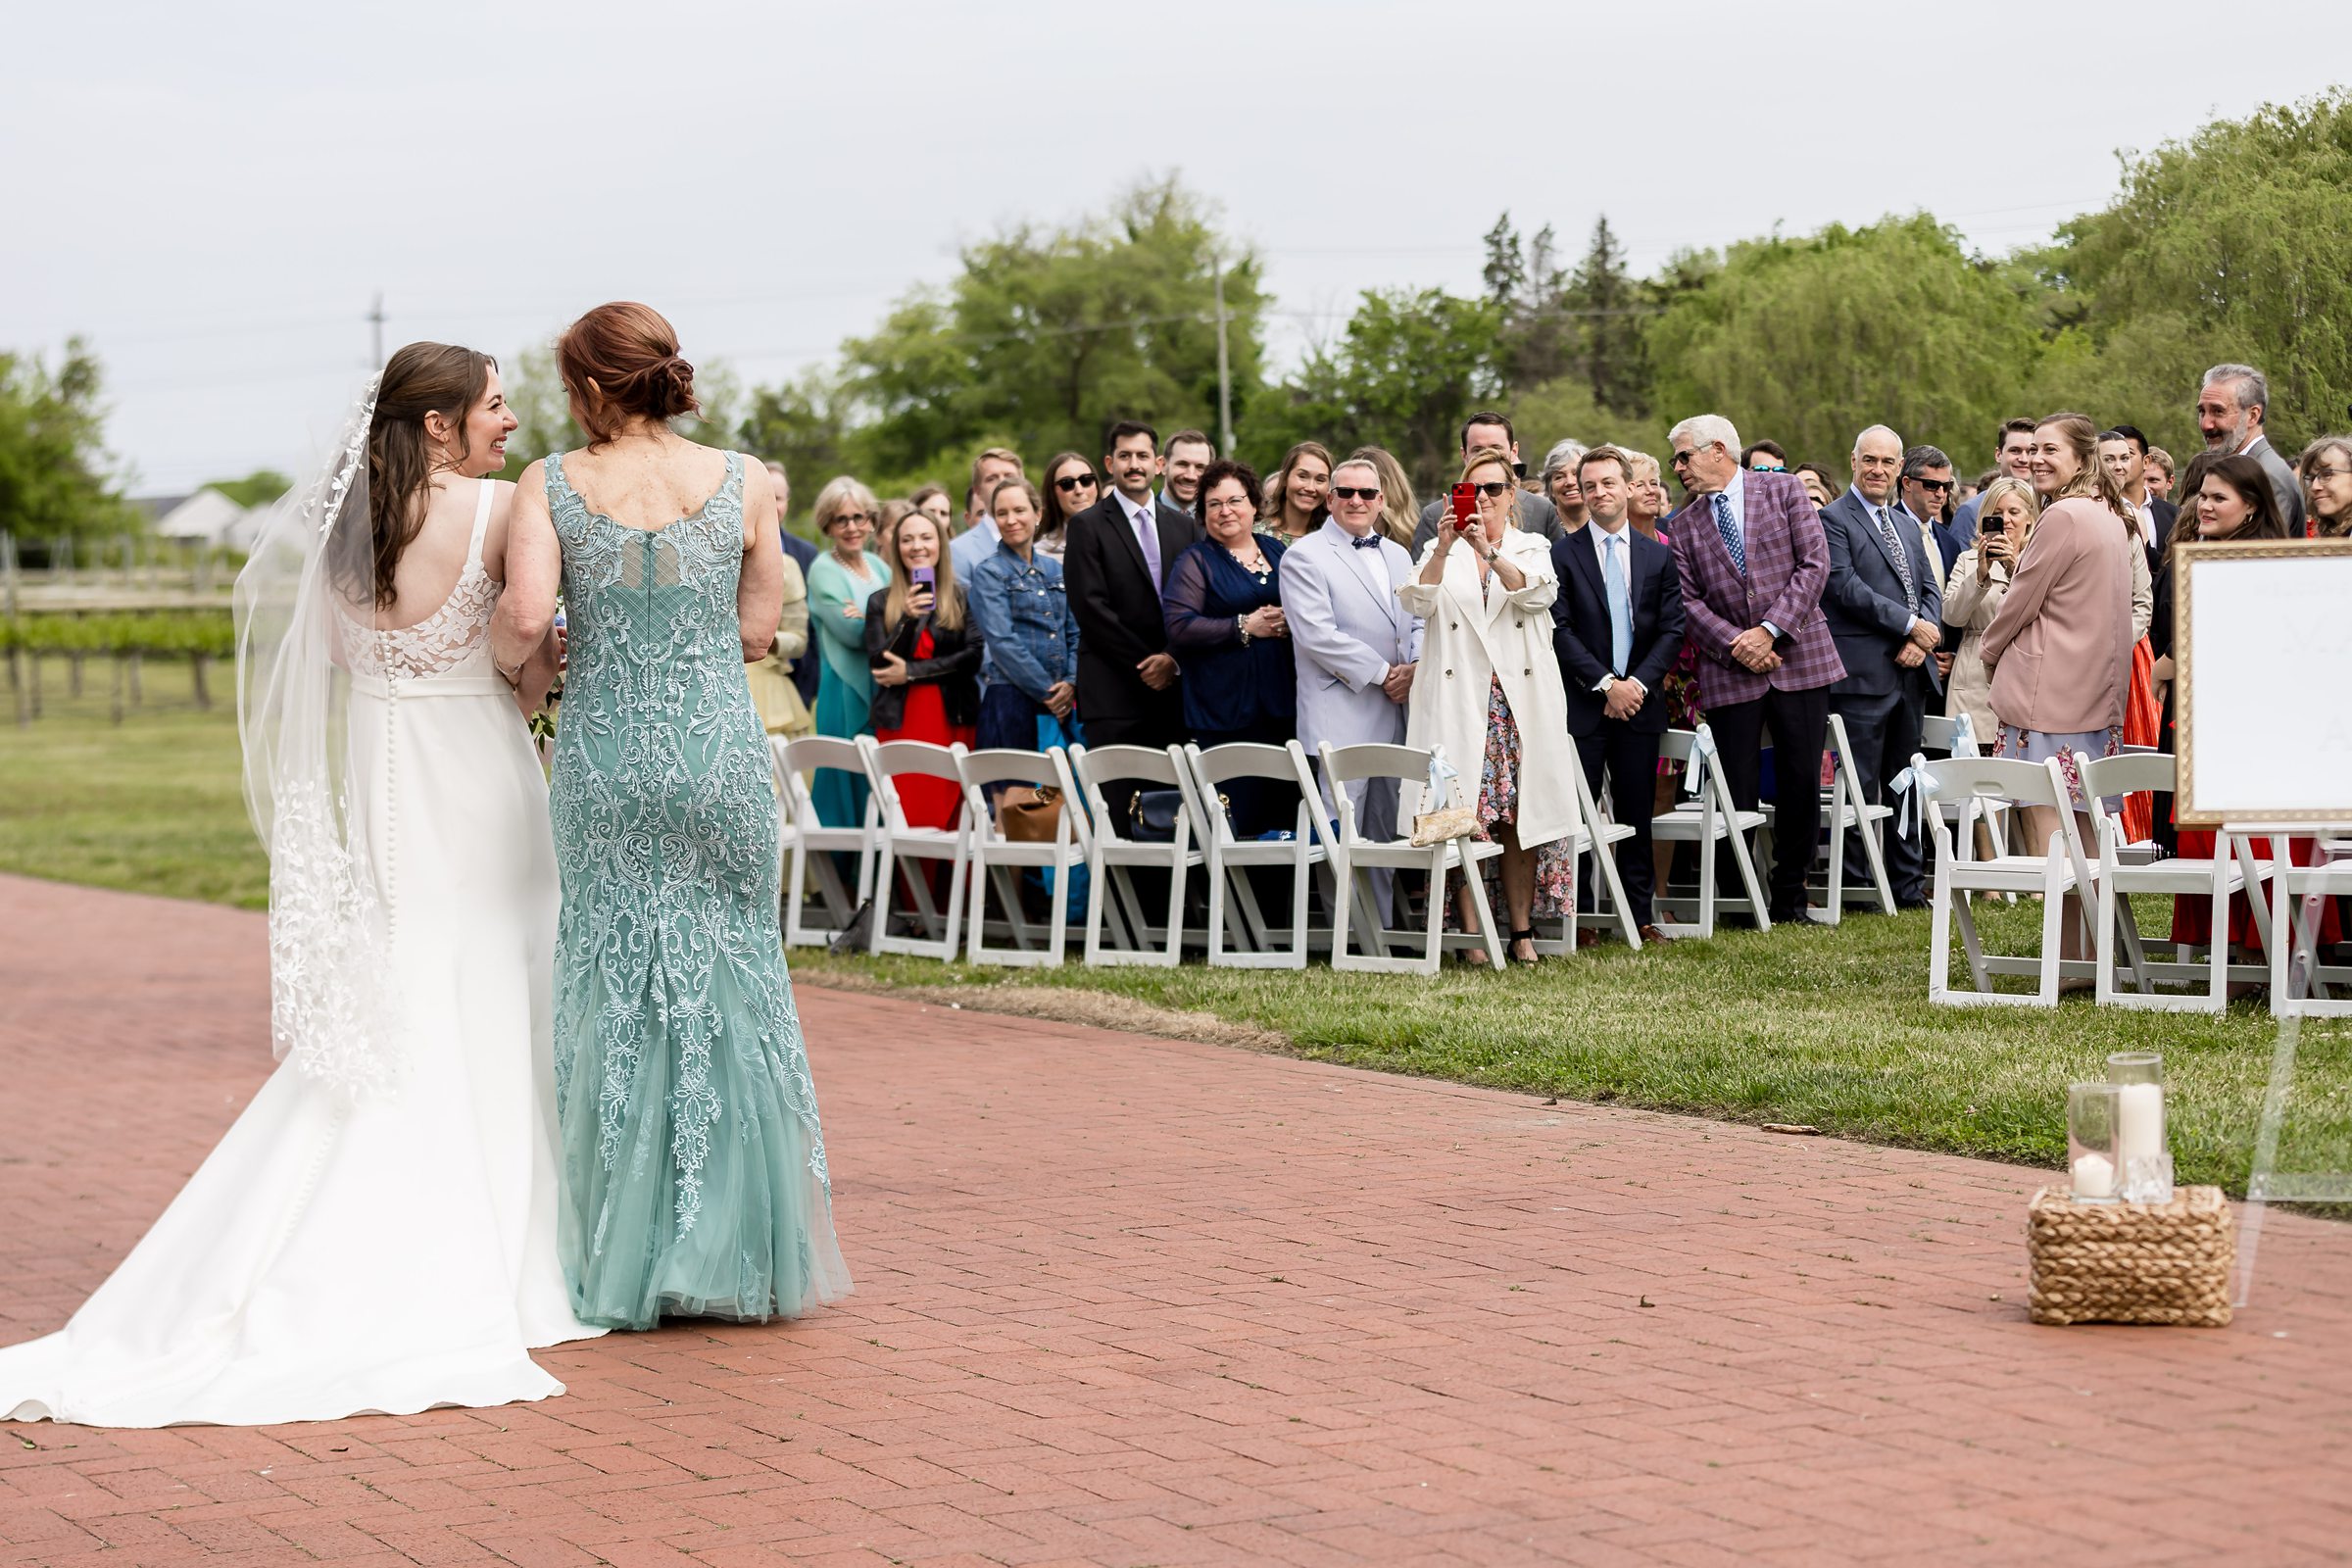 A bride in a white dress walks with another woman in a teal dress down an outdoor aisle as guests seated on white chairs look on.